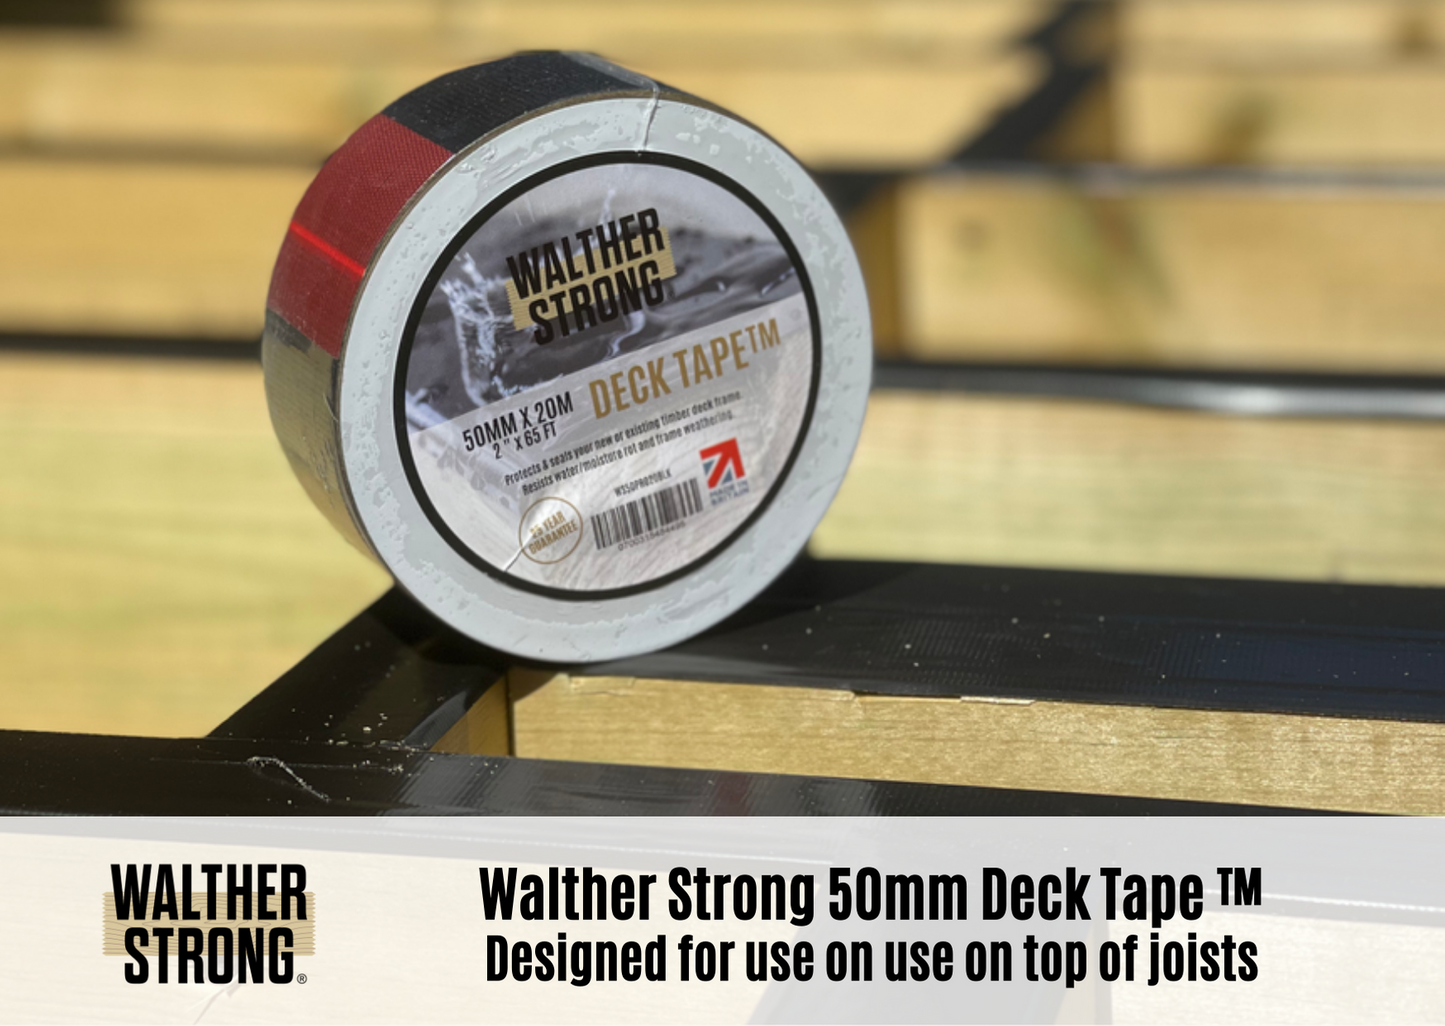 DECK TAPE® [Recommended for use on top of joists]